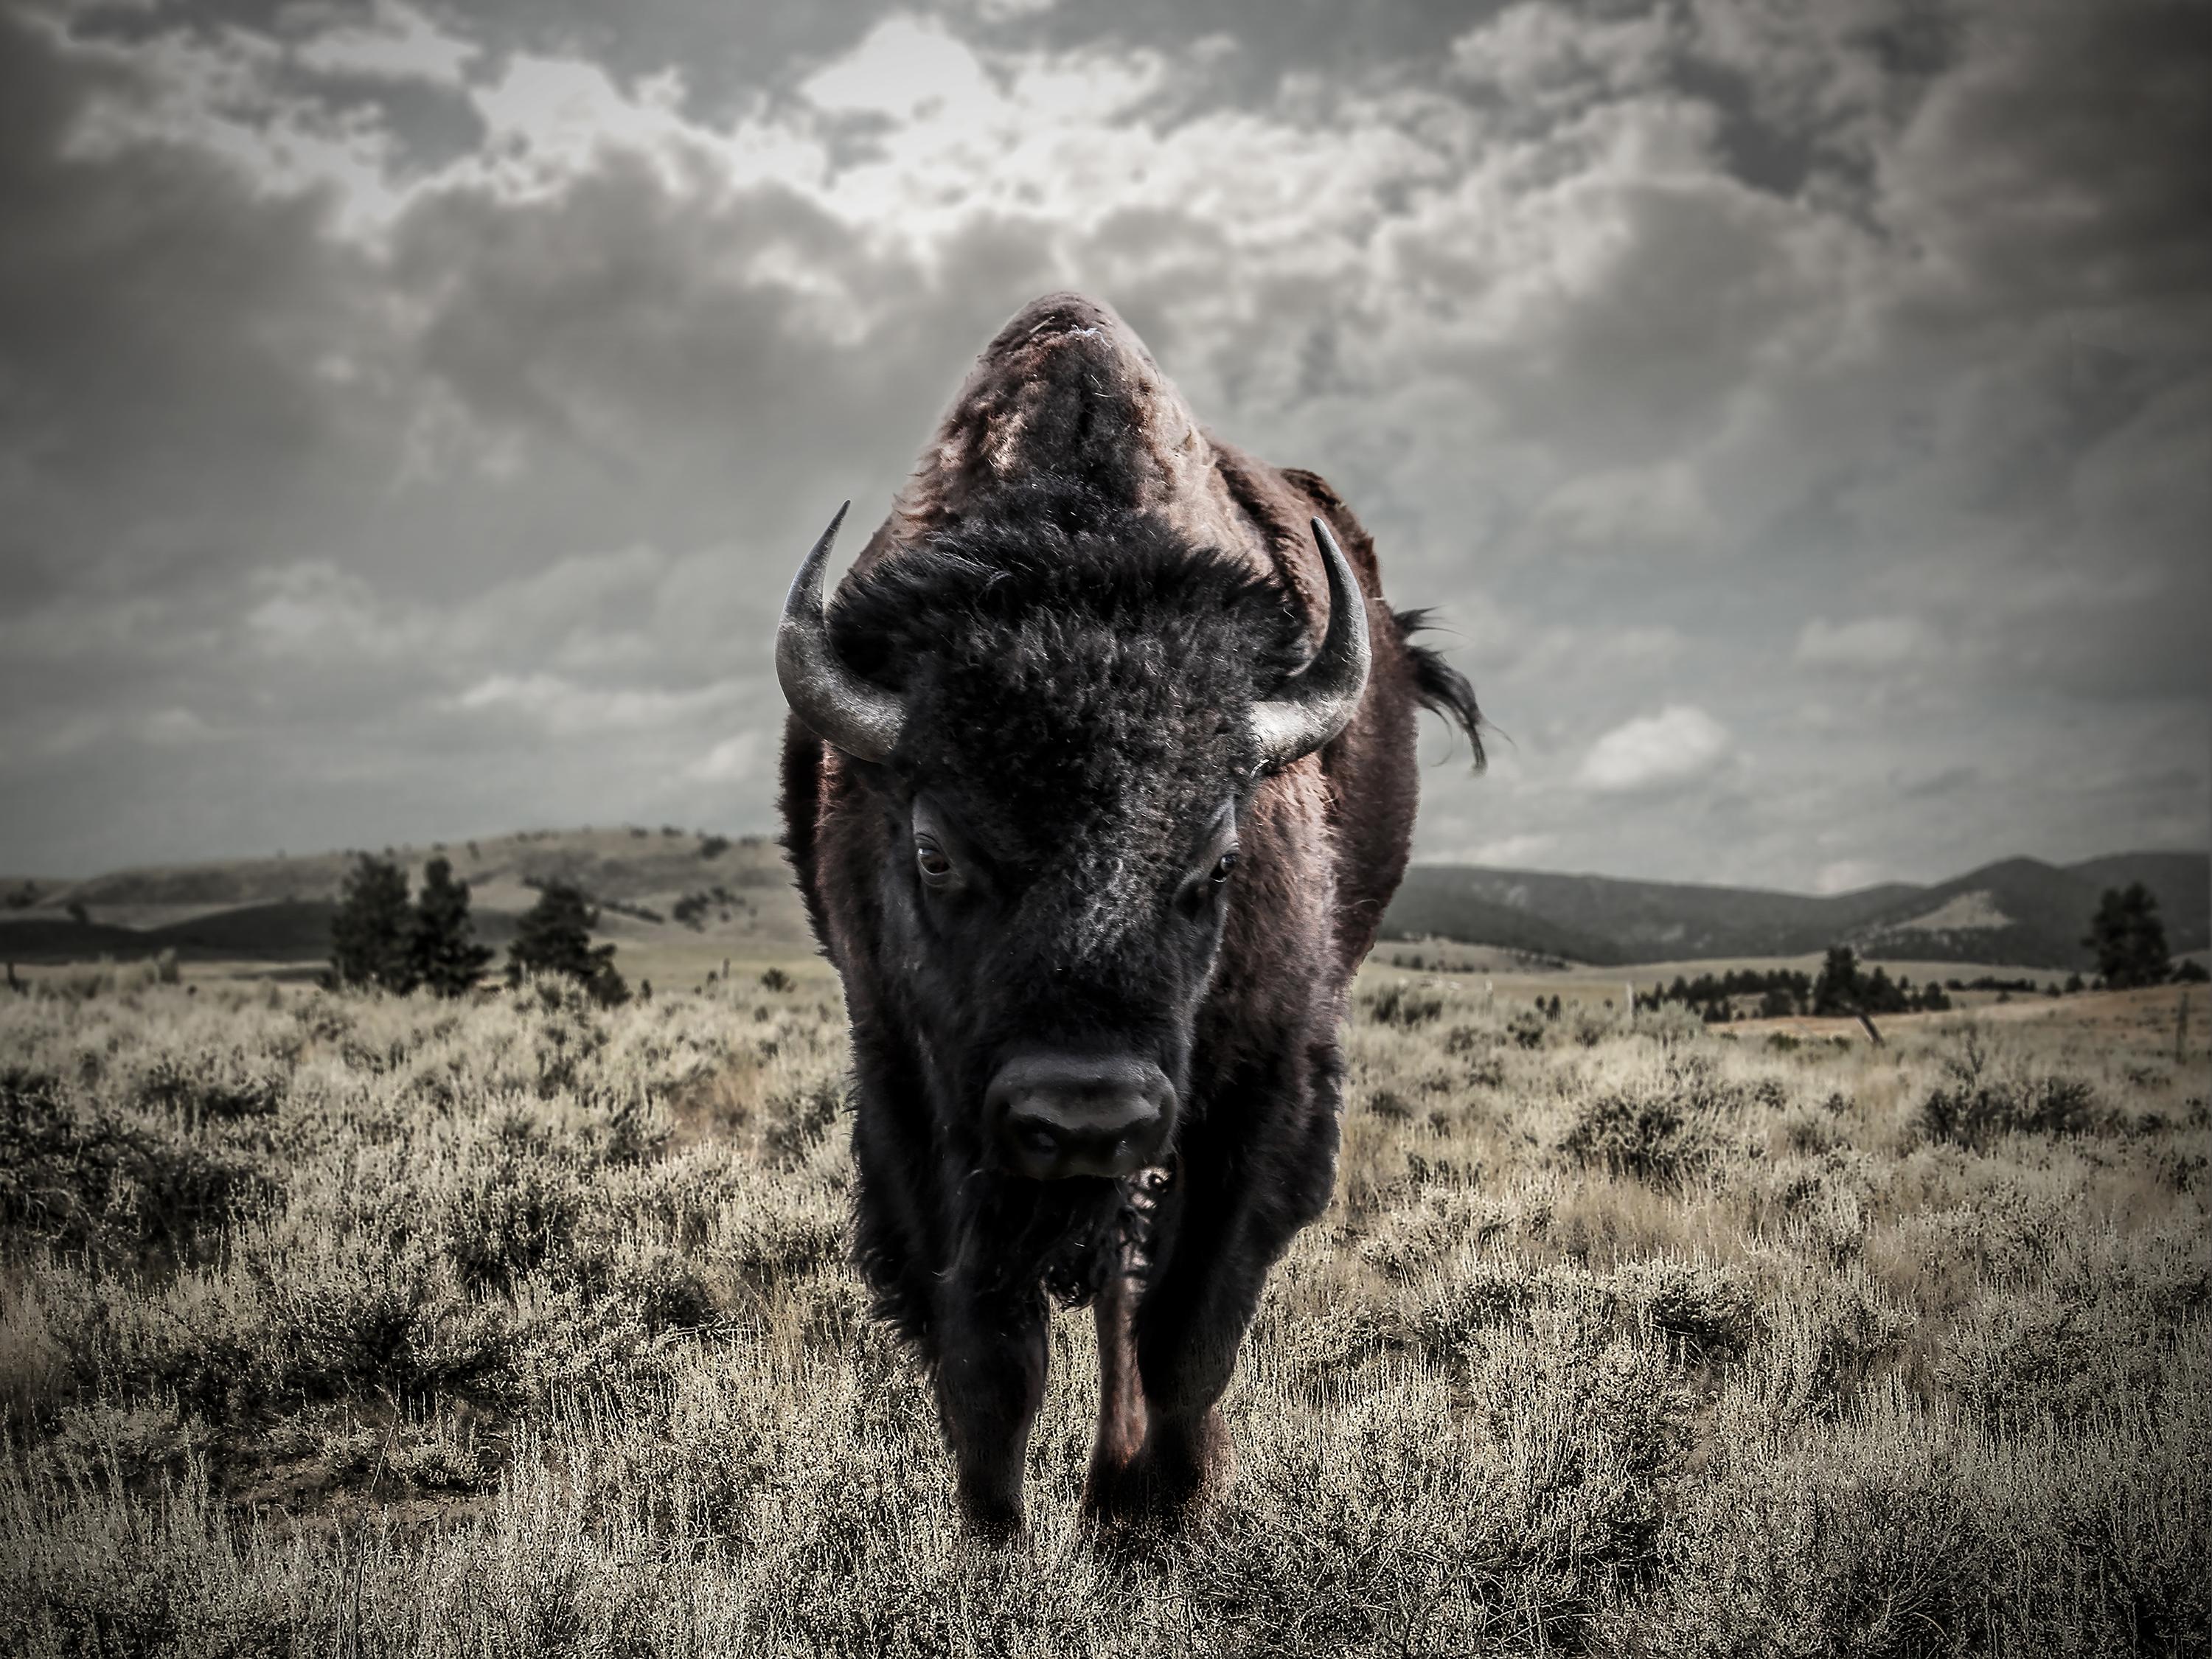 Shane Russeck Black and White Photograph - "Bison" 36x48 -  Bison, Photography, Photograph, Buffalo, Signed Fine Art